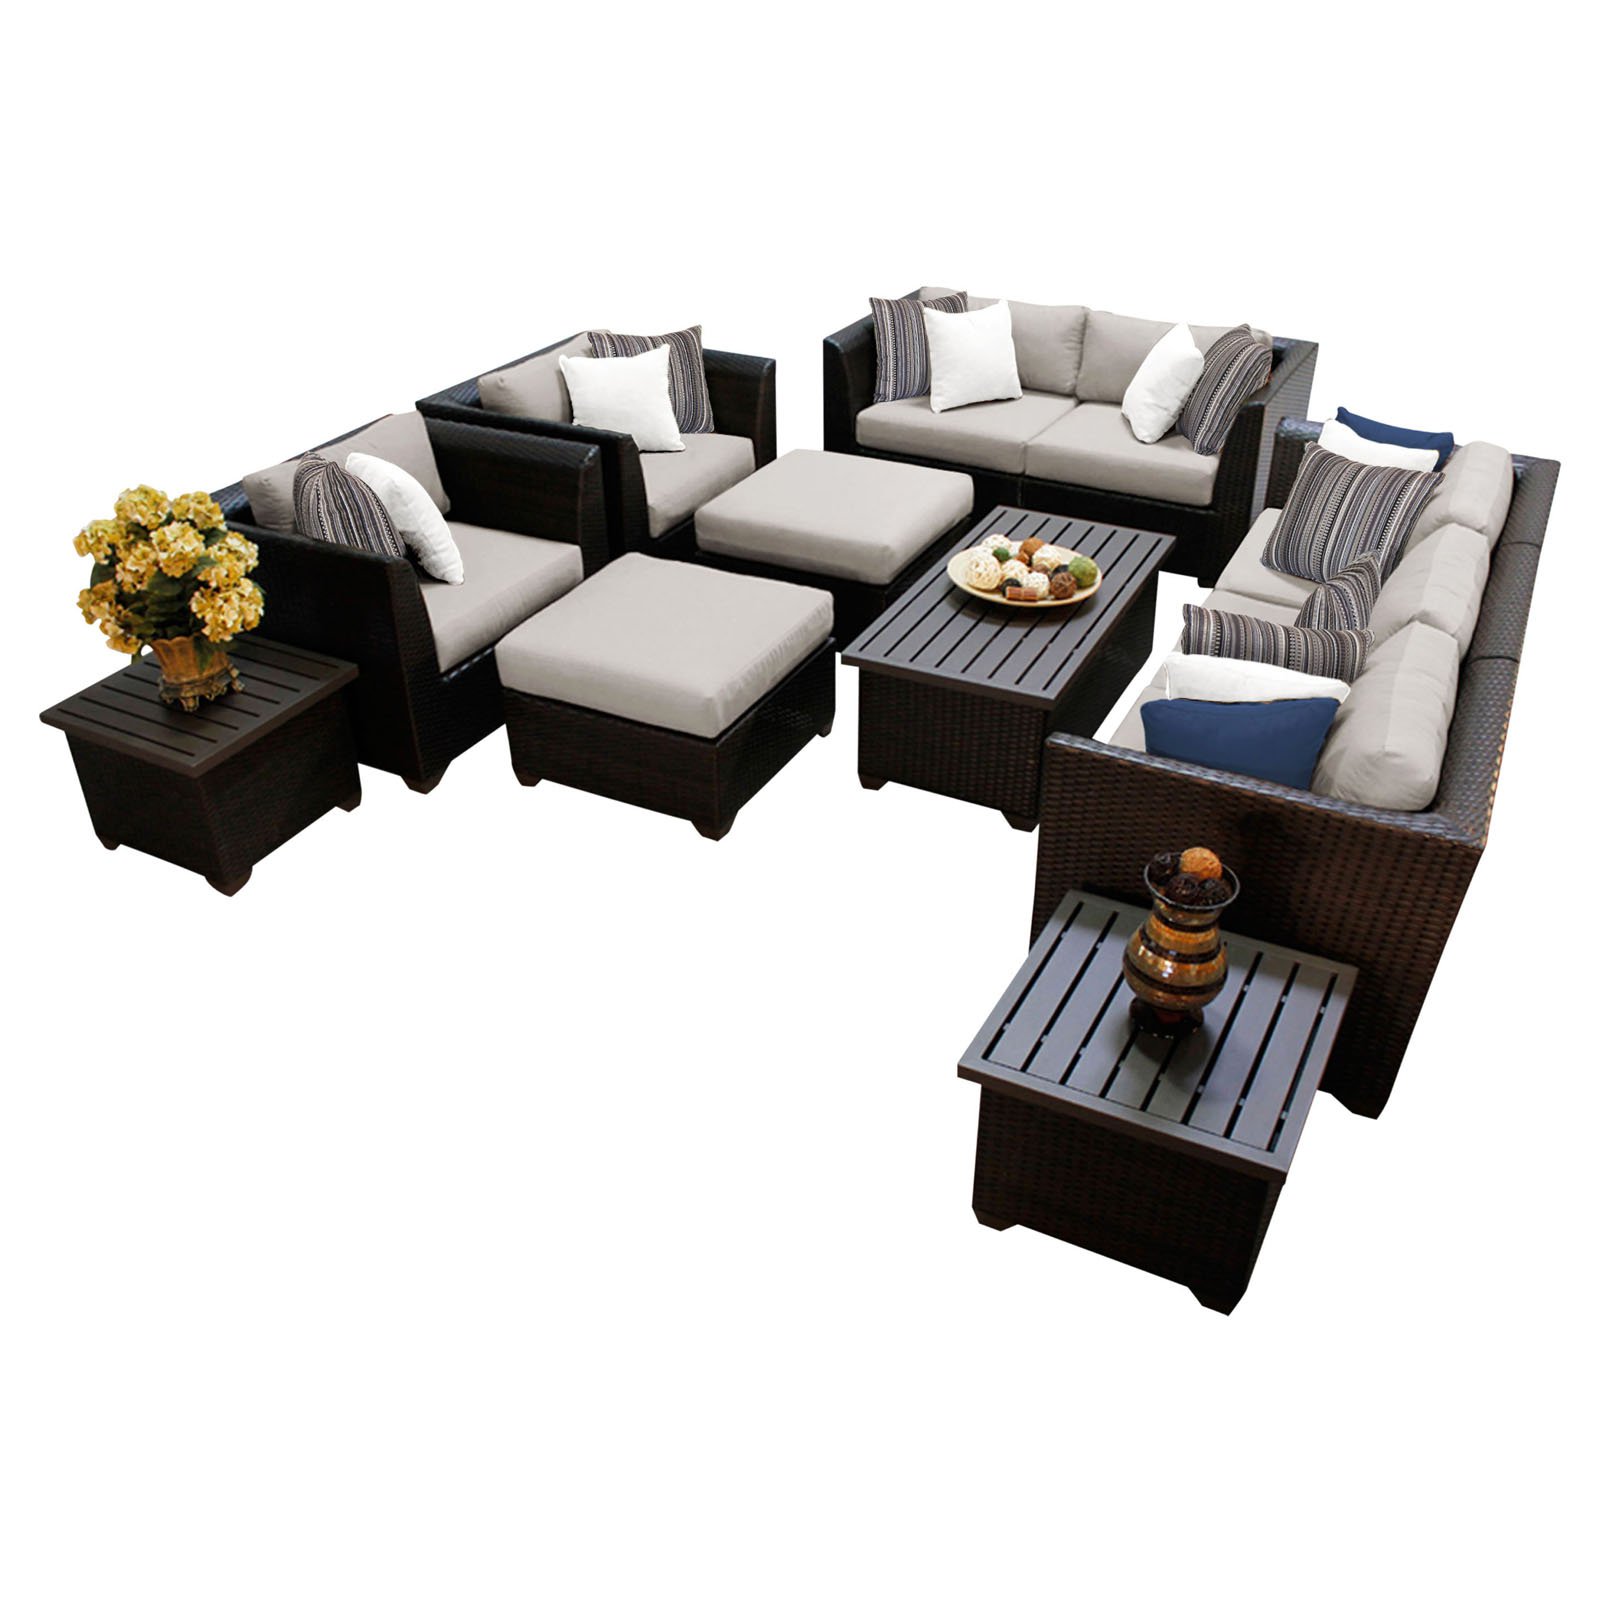 TK Classics Barbados 12 Piece Wicker Outdoor Sectional Seating Group with Storage Coffee Table and End Tables, Ash - image 1 of 11